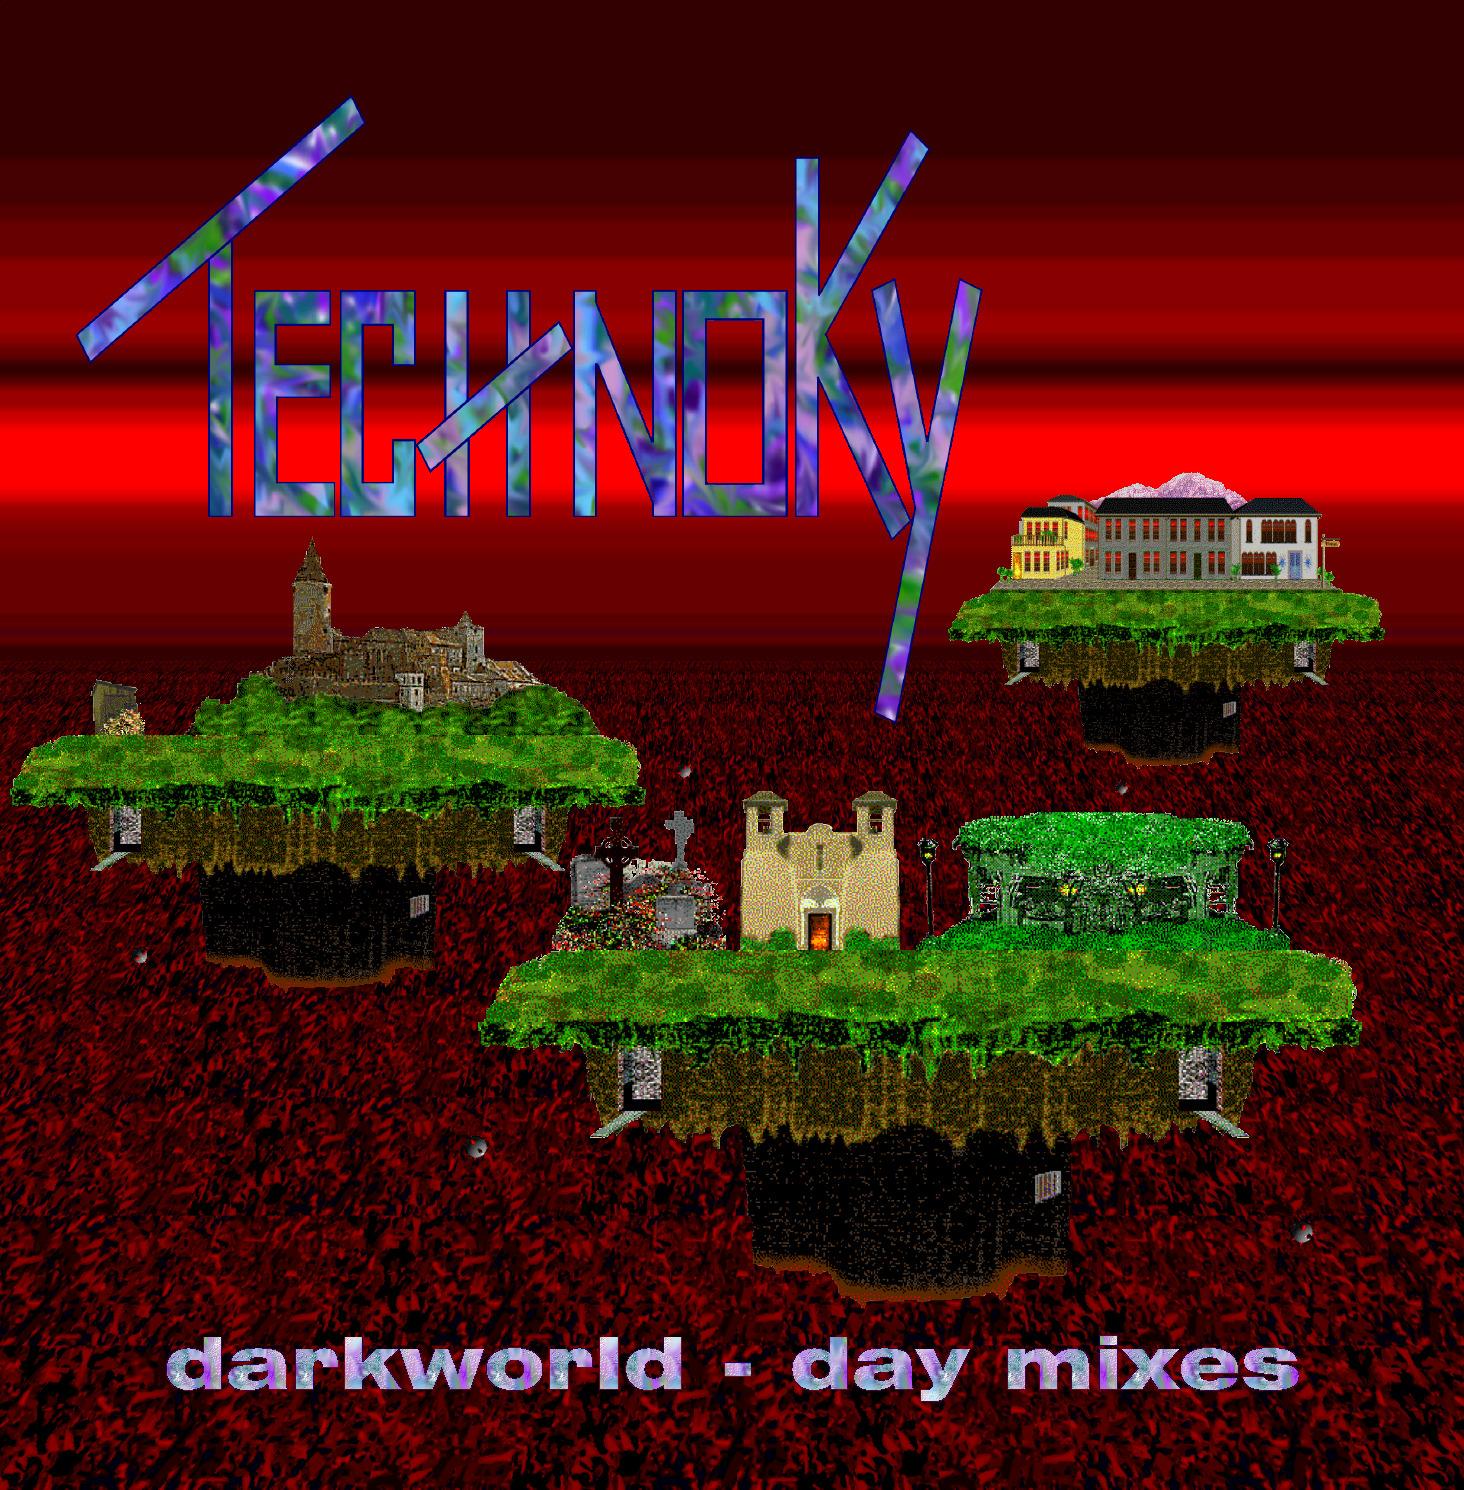 CD cover for "darkworld - day mixes" from TechnoKy